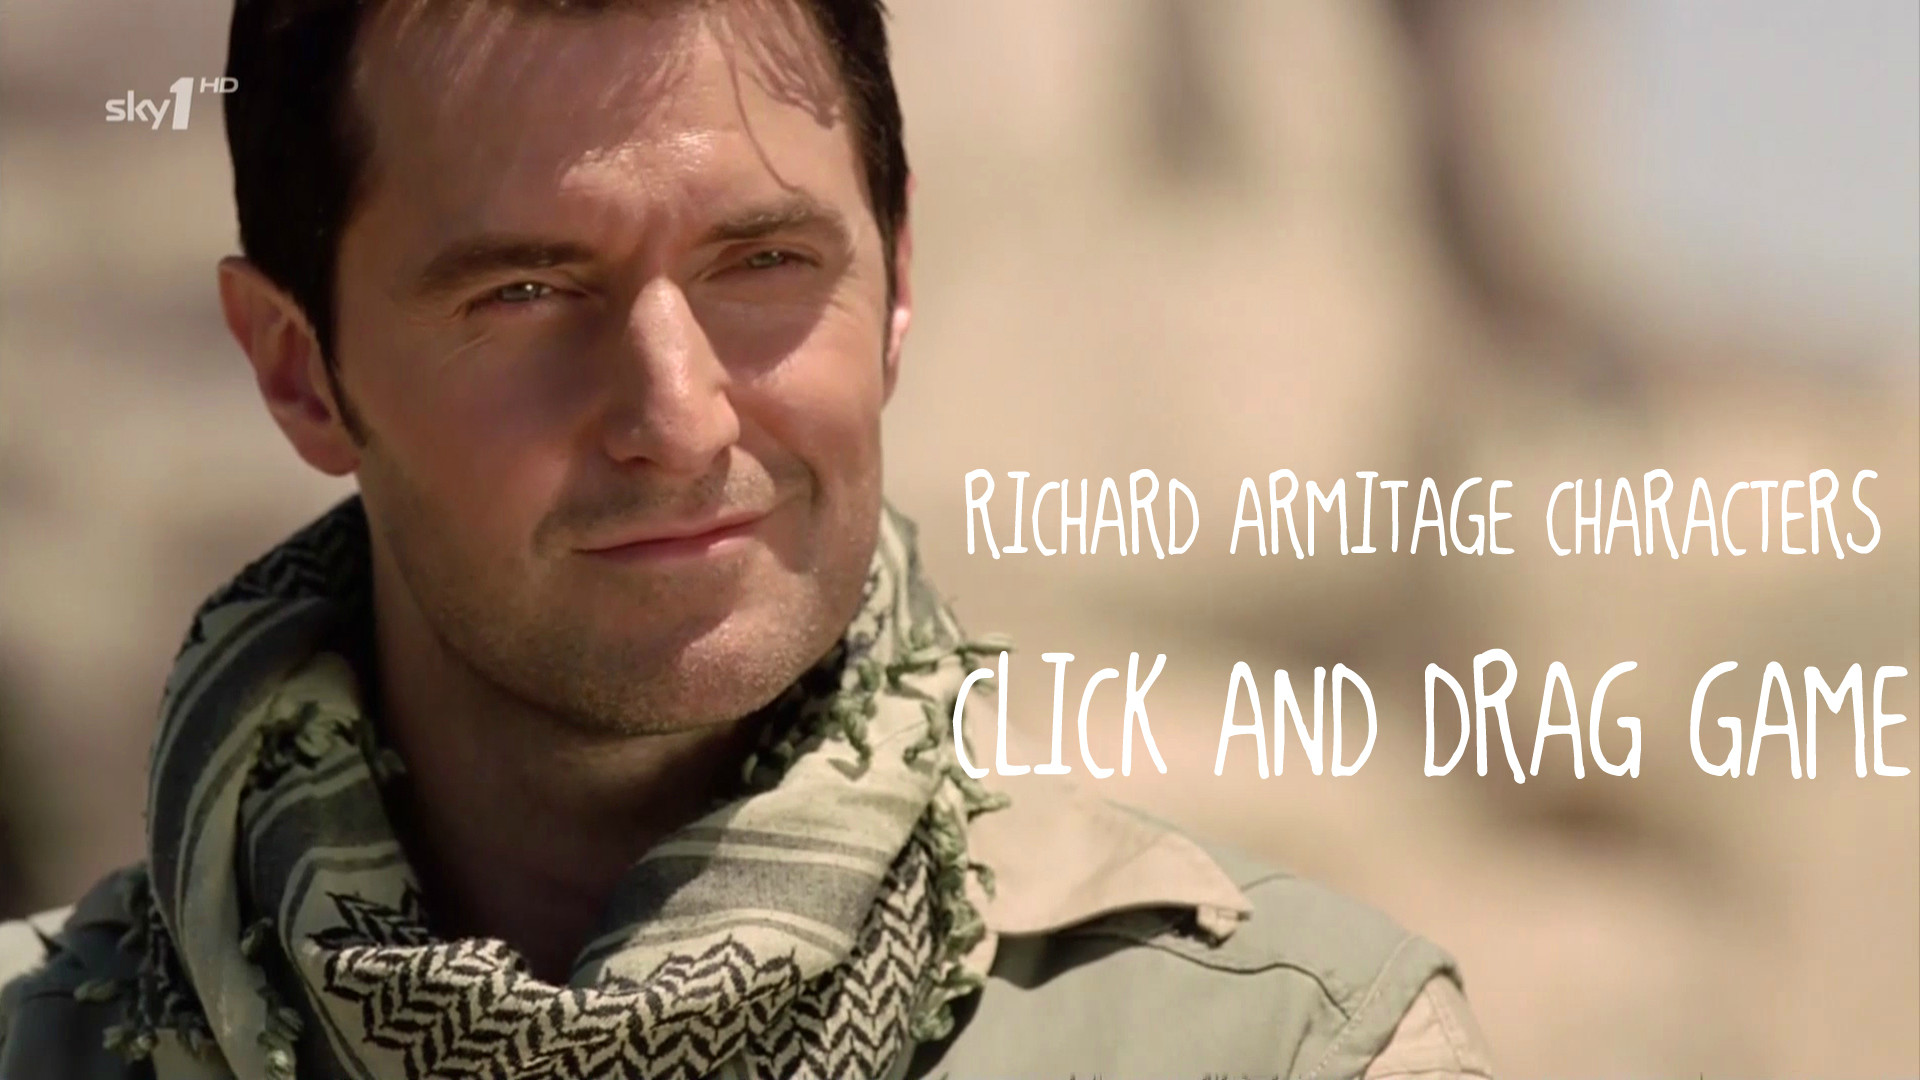 1920x1080 Richard Armitage characters : click and drag game